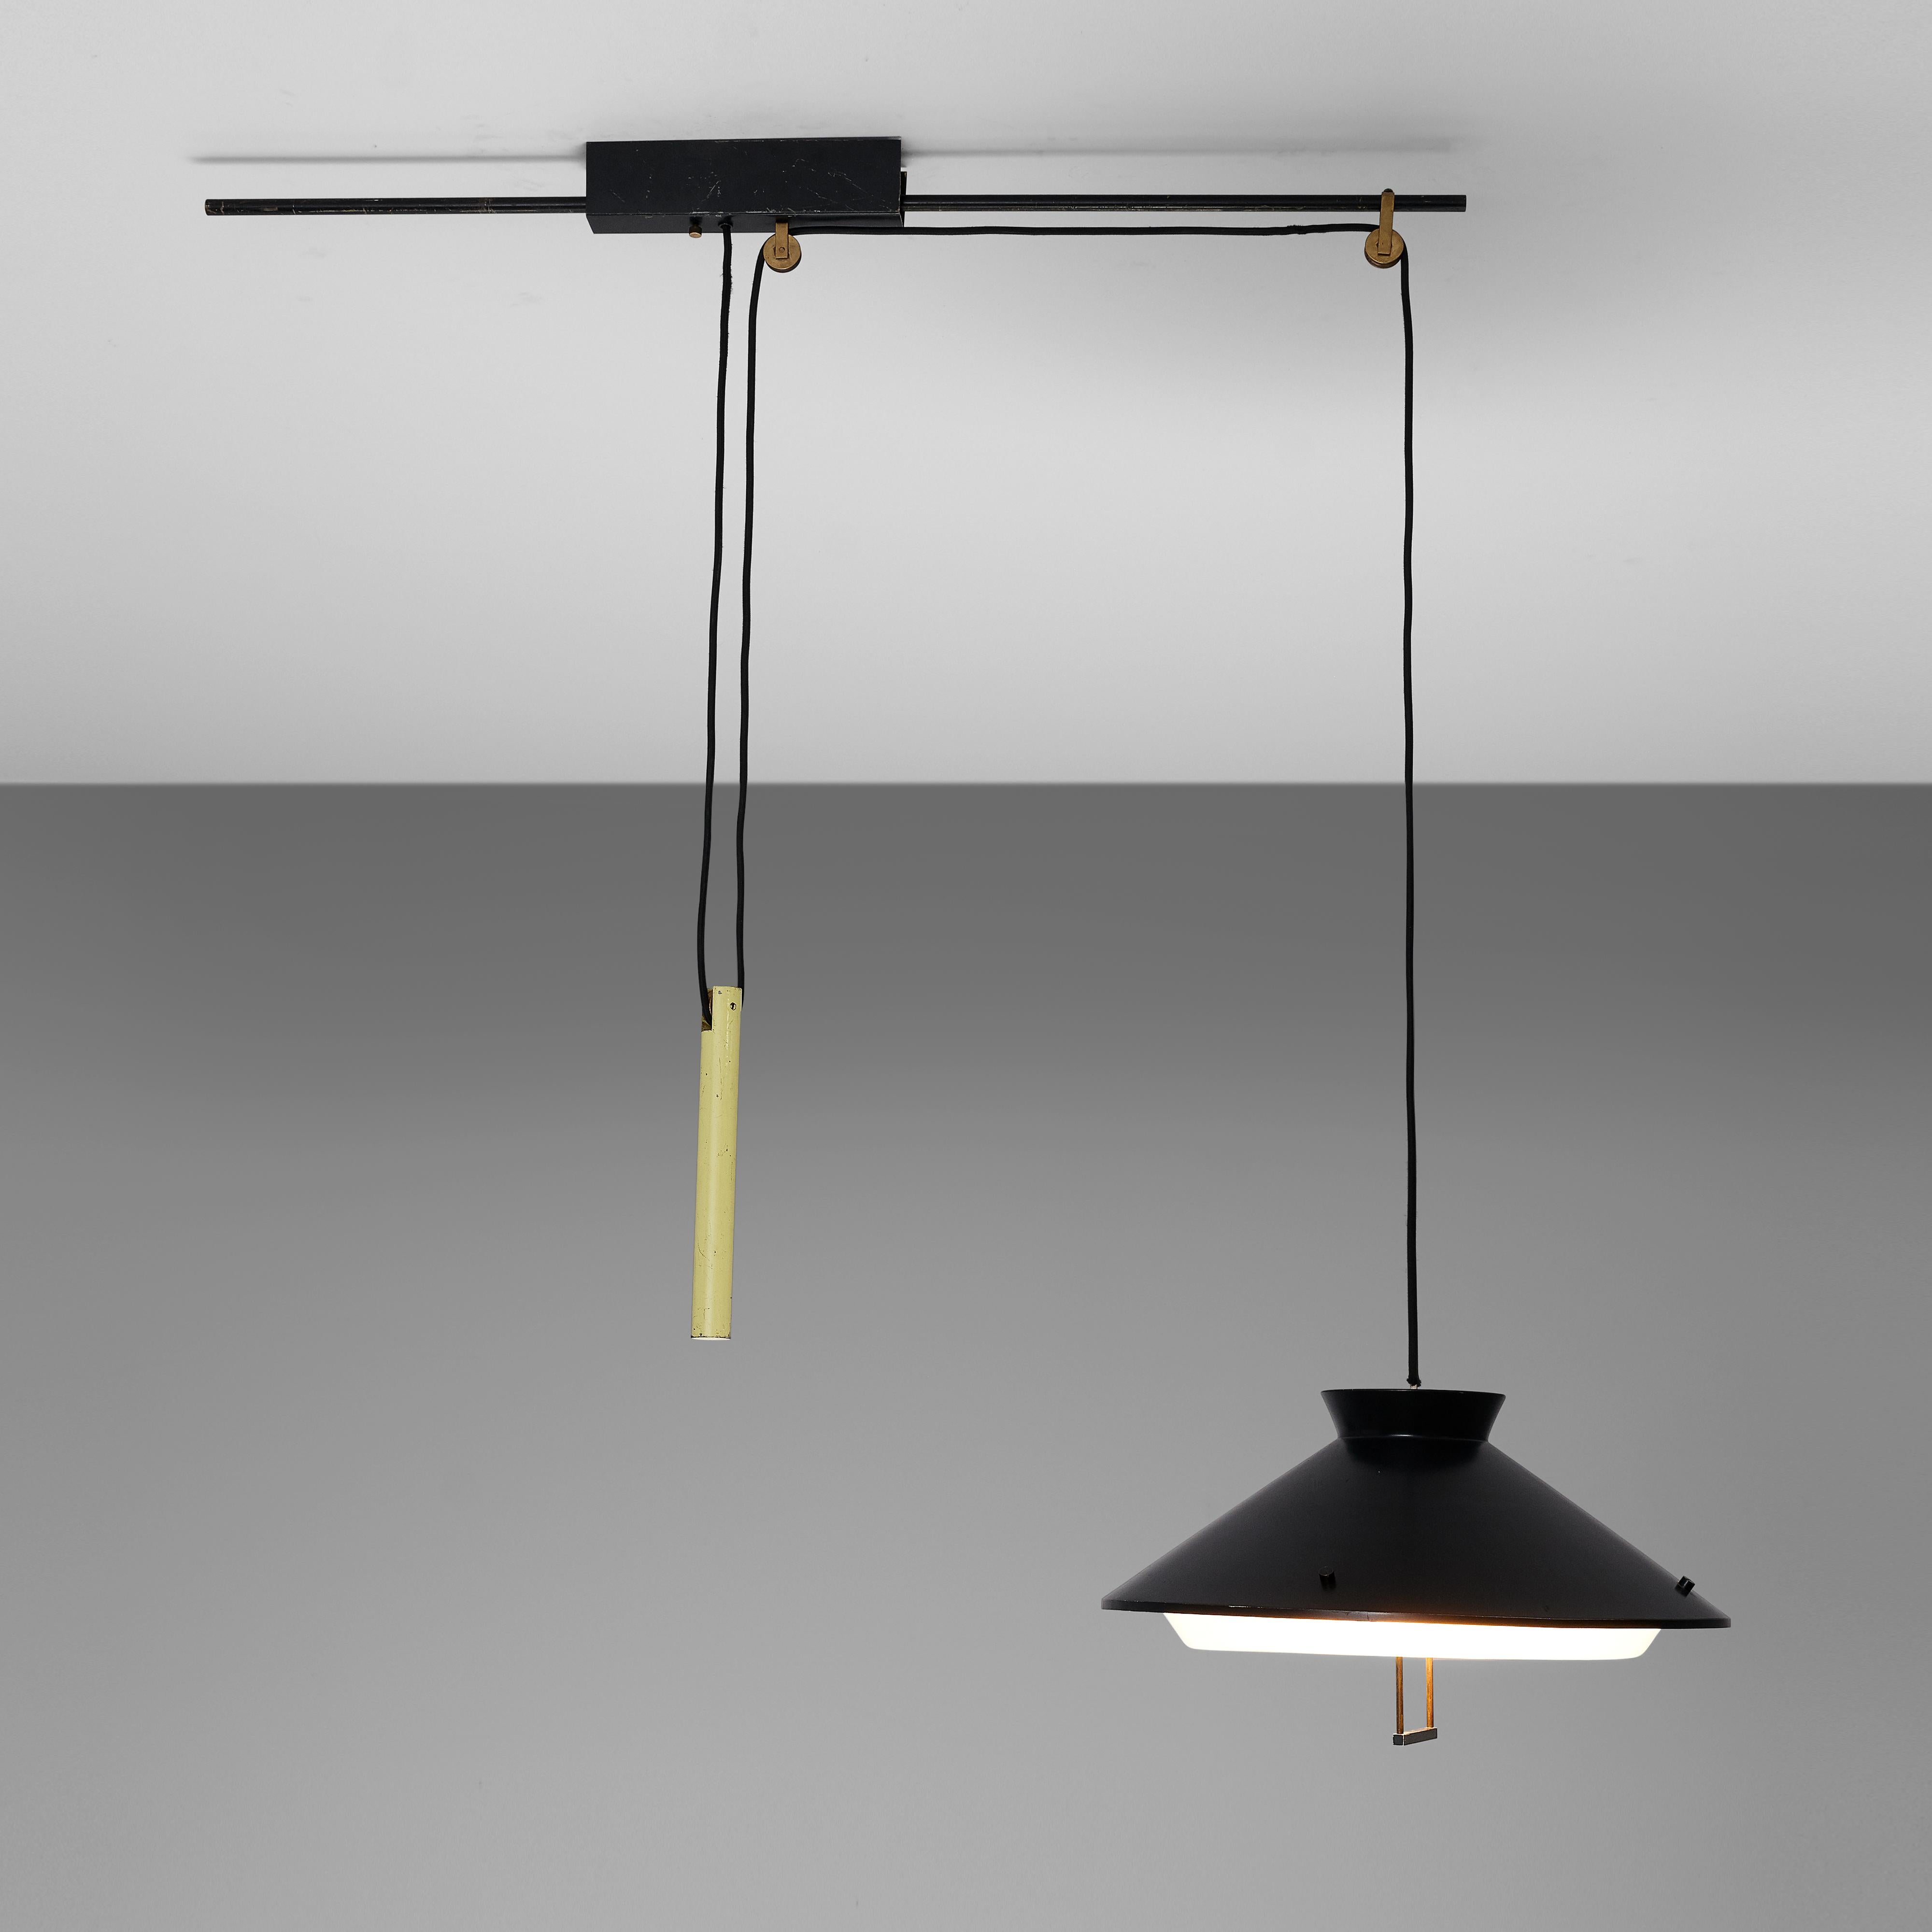 Pendant lamp with adjustable counterweight, black and yellow lacquered metal, brass, wiring, plastic, Italy, 1960s

This ceiling lamp is an excellent example of the 'new style' Italian lighting designs of the 1950s and 1960s. Executed in a fashion